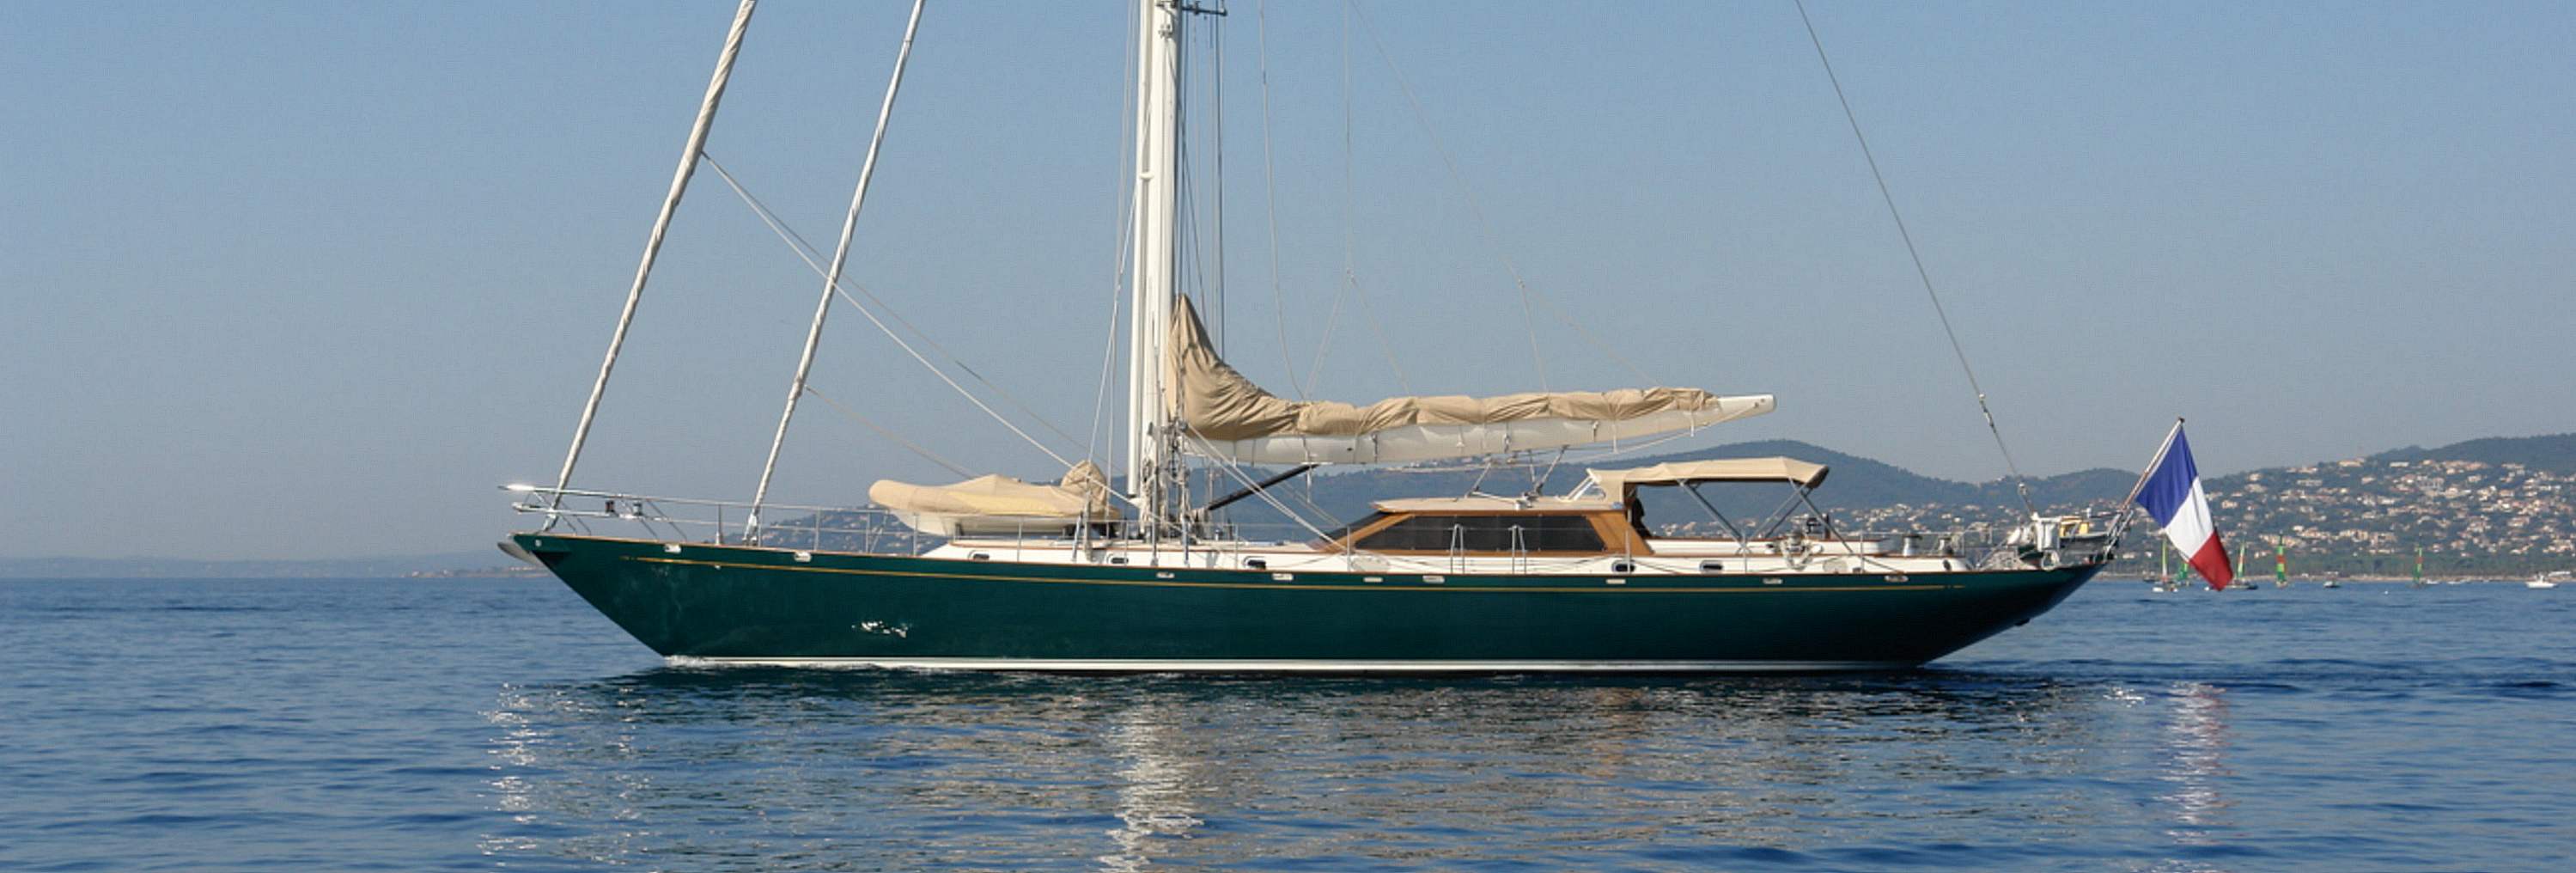 WHIRLWIND : Now based in Port-Camargue